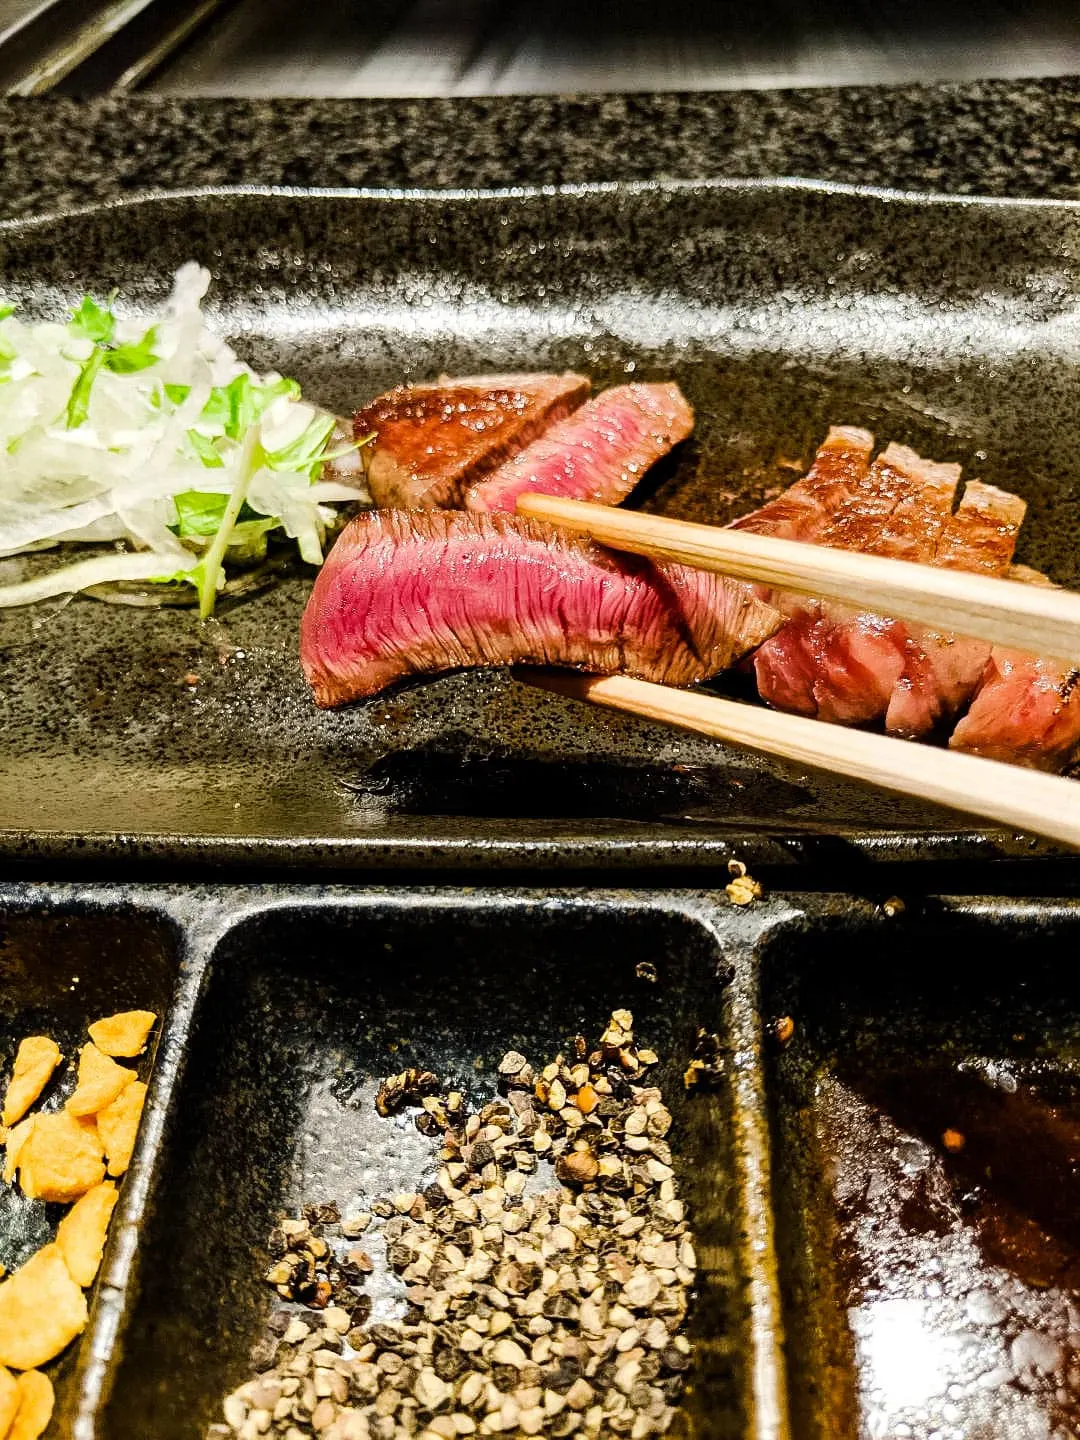 Japanese Wagyu Beef - Where to go to get Wagyu beef that is tender, amazing, and like nothing you have ever had before.  